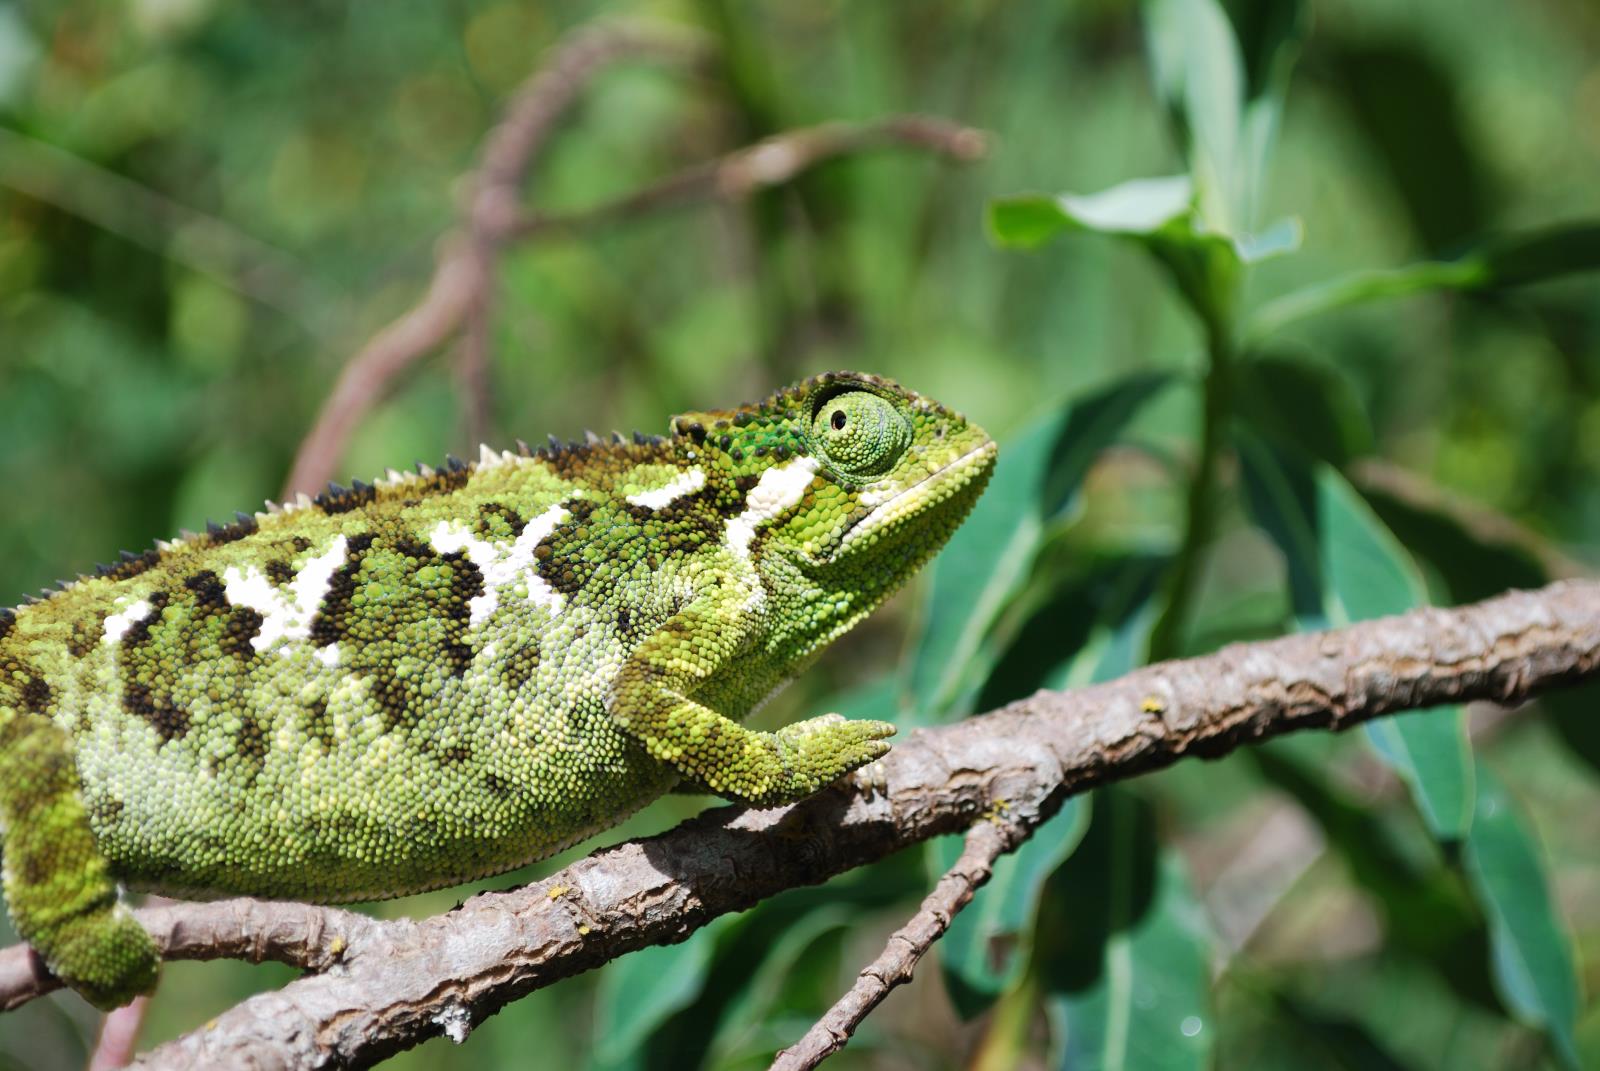 A chameleon in the Harenna Forest, Bale Mountains - Churches, Castles and Mountains of Ethiopia